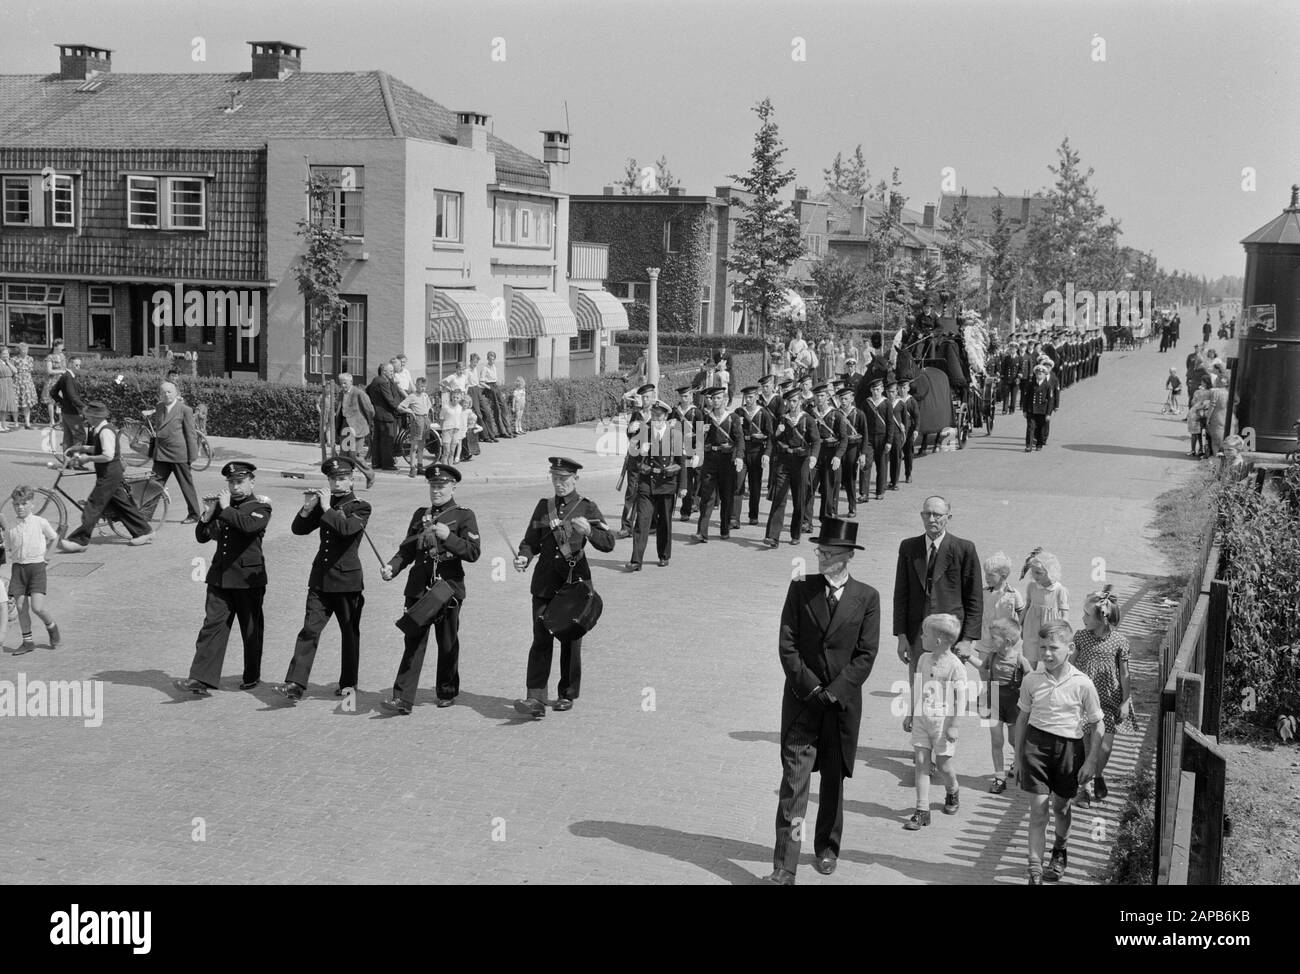 Funeral at Dordrecht sergeant aircraft telegraphist Bolleurs. On the way to cemetery Date: 26 July 1948 Location: Dordrecht Keywords: Cemetery, Burial, Sergeants, Road Stock Photo